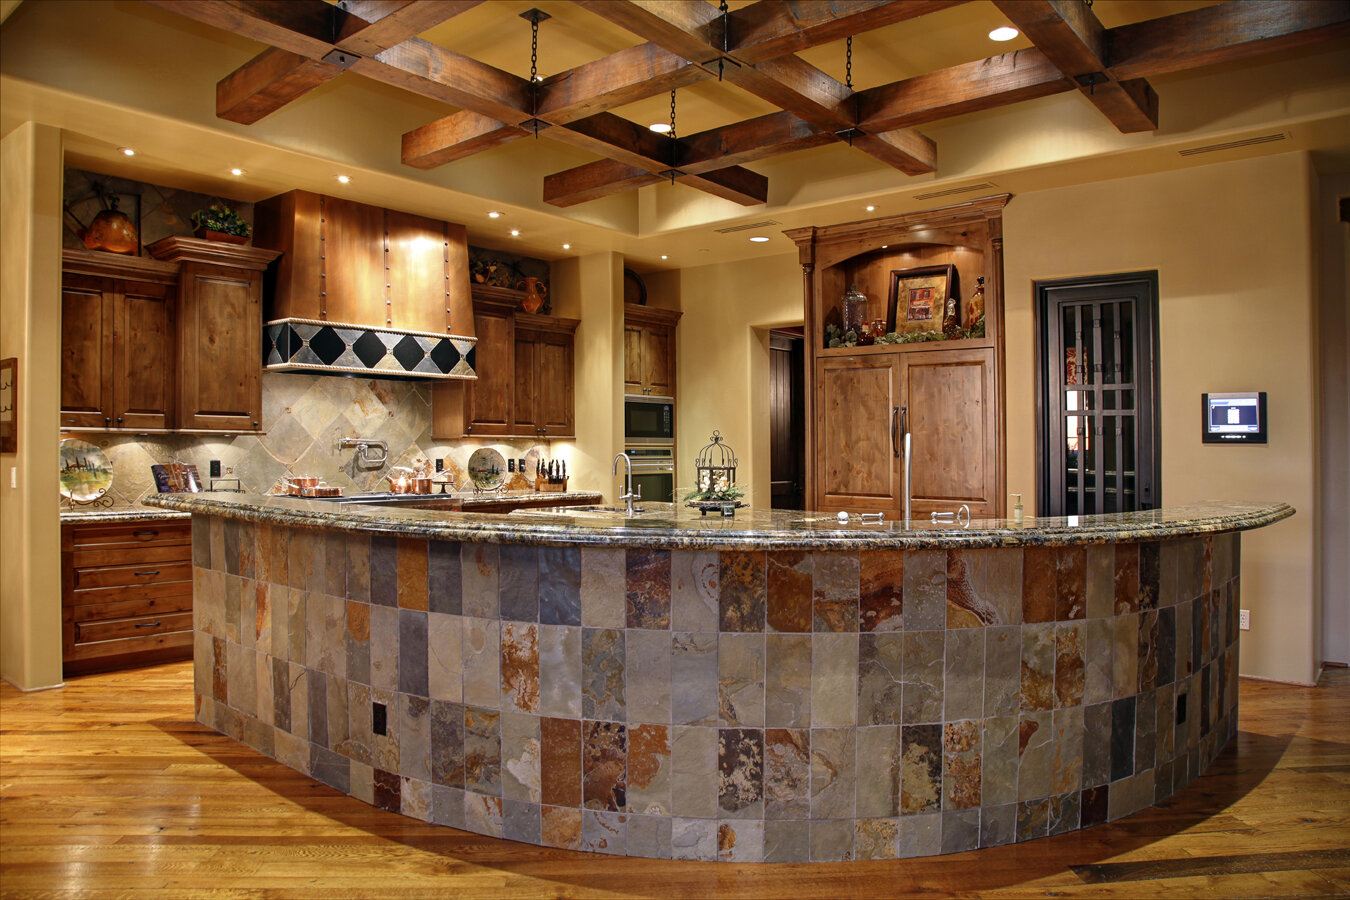 009 The Kitchen at the Show Home.  The Wine Room is located through the wrought iron door_6847.jpg